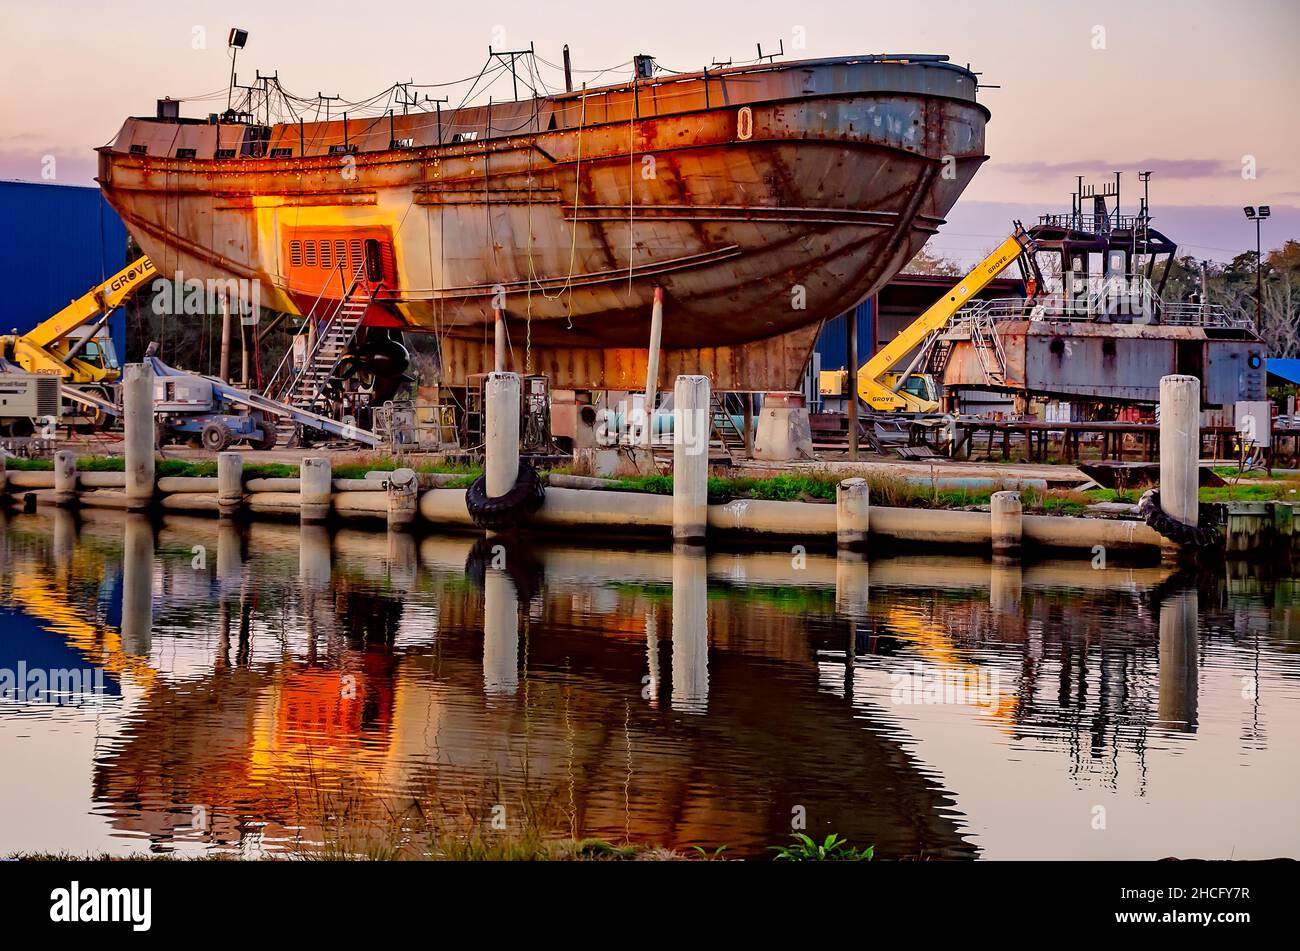 A boat sits in dry dock for repairs, Dec. 27, 2021, in Bayou La Batre, Alabama. Bayou La Batre is known as the seafood capital of Alabama. Stock Photo